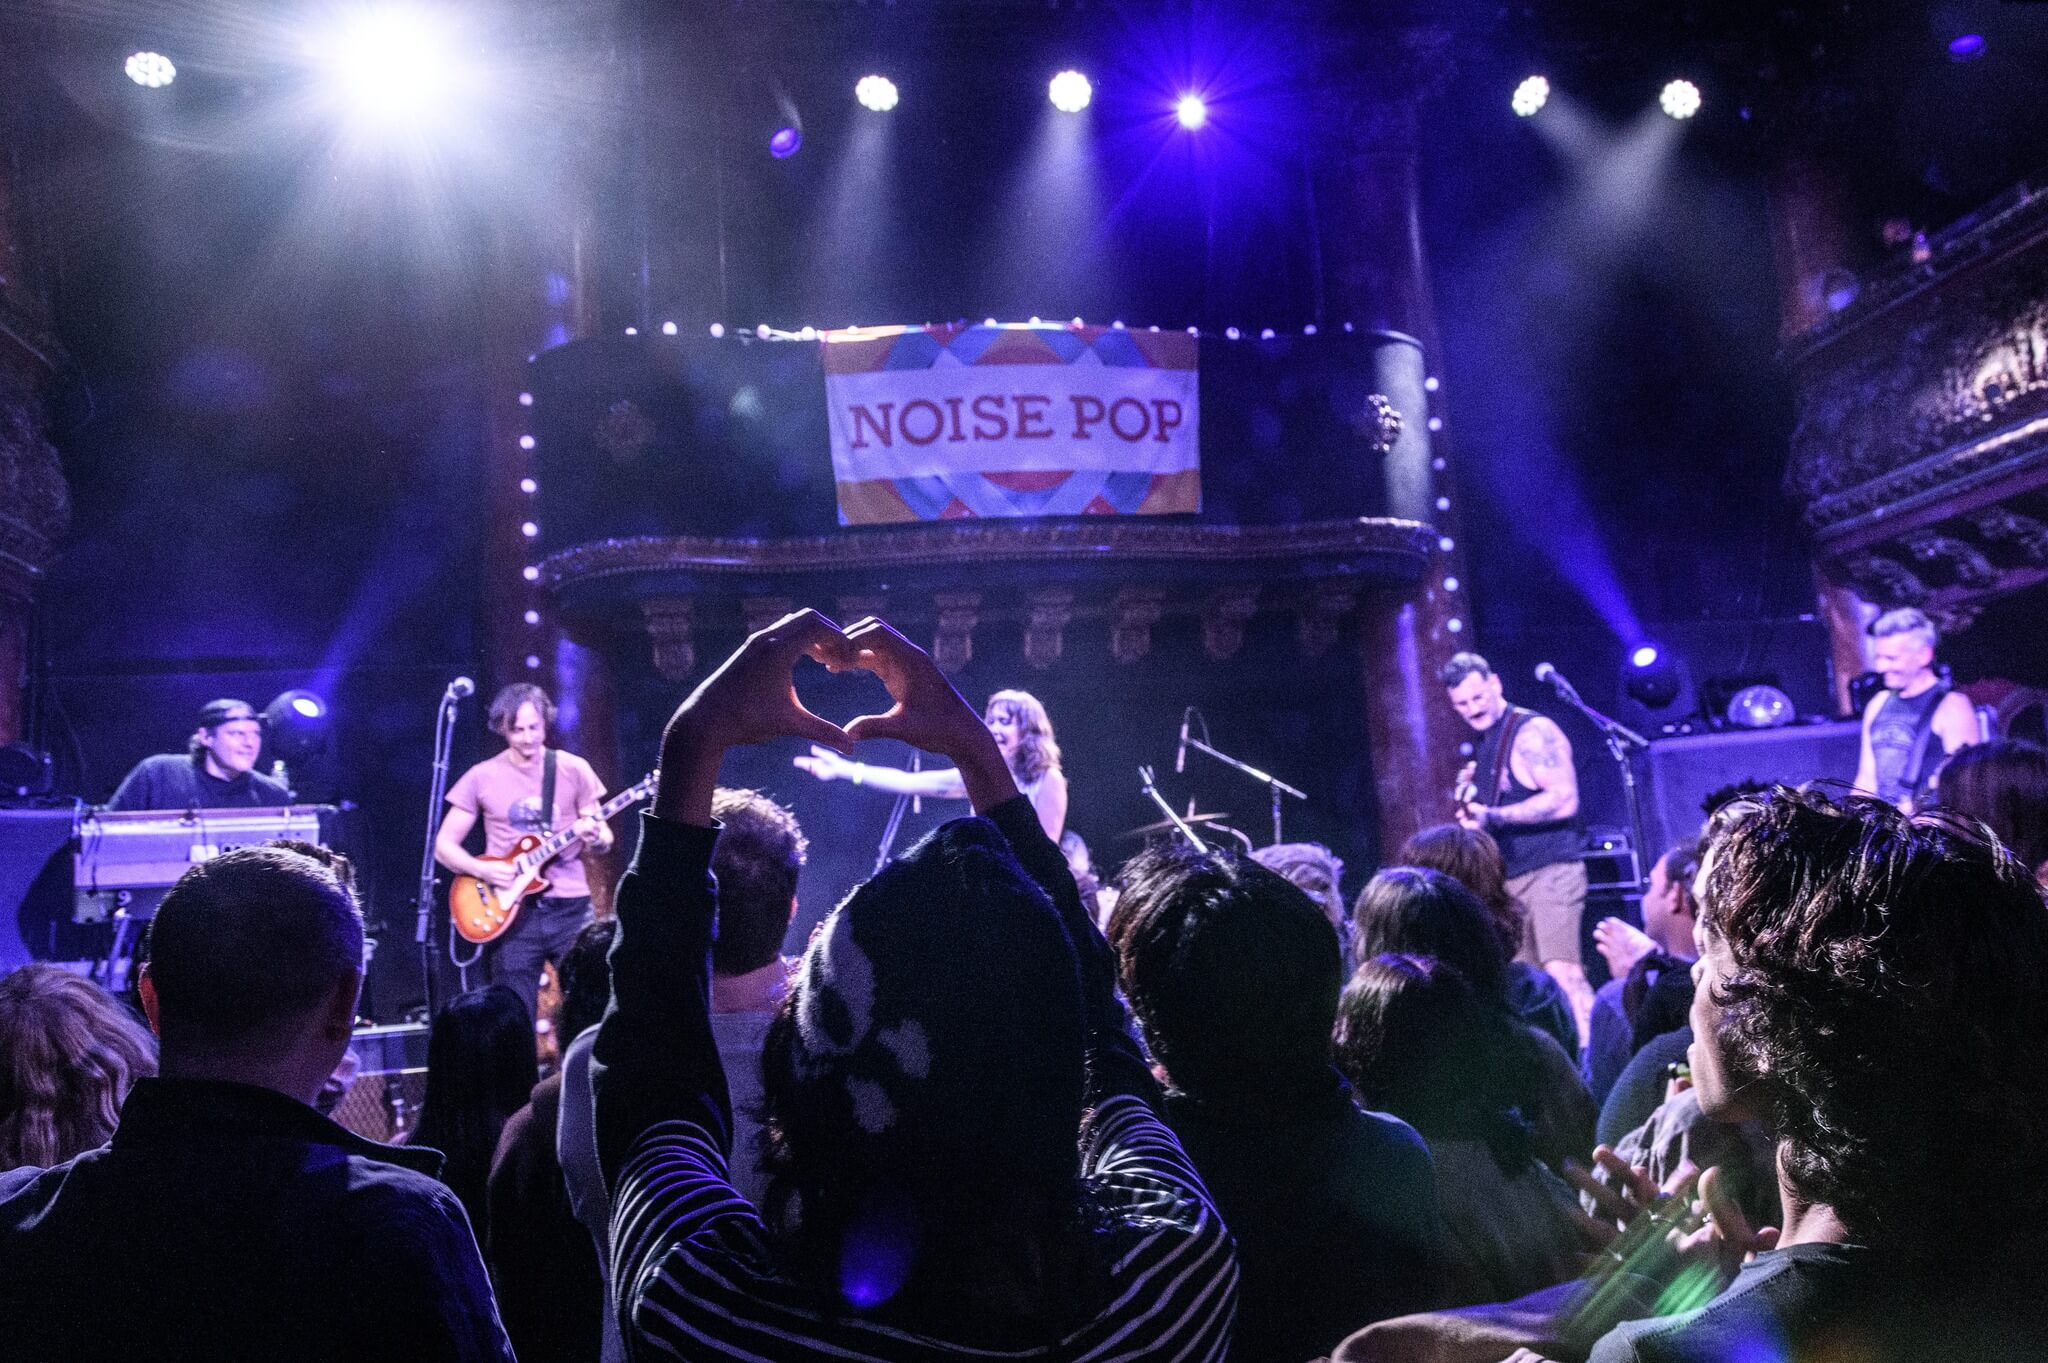 Noise Pop is an annual music festival in February in San Francisco